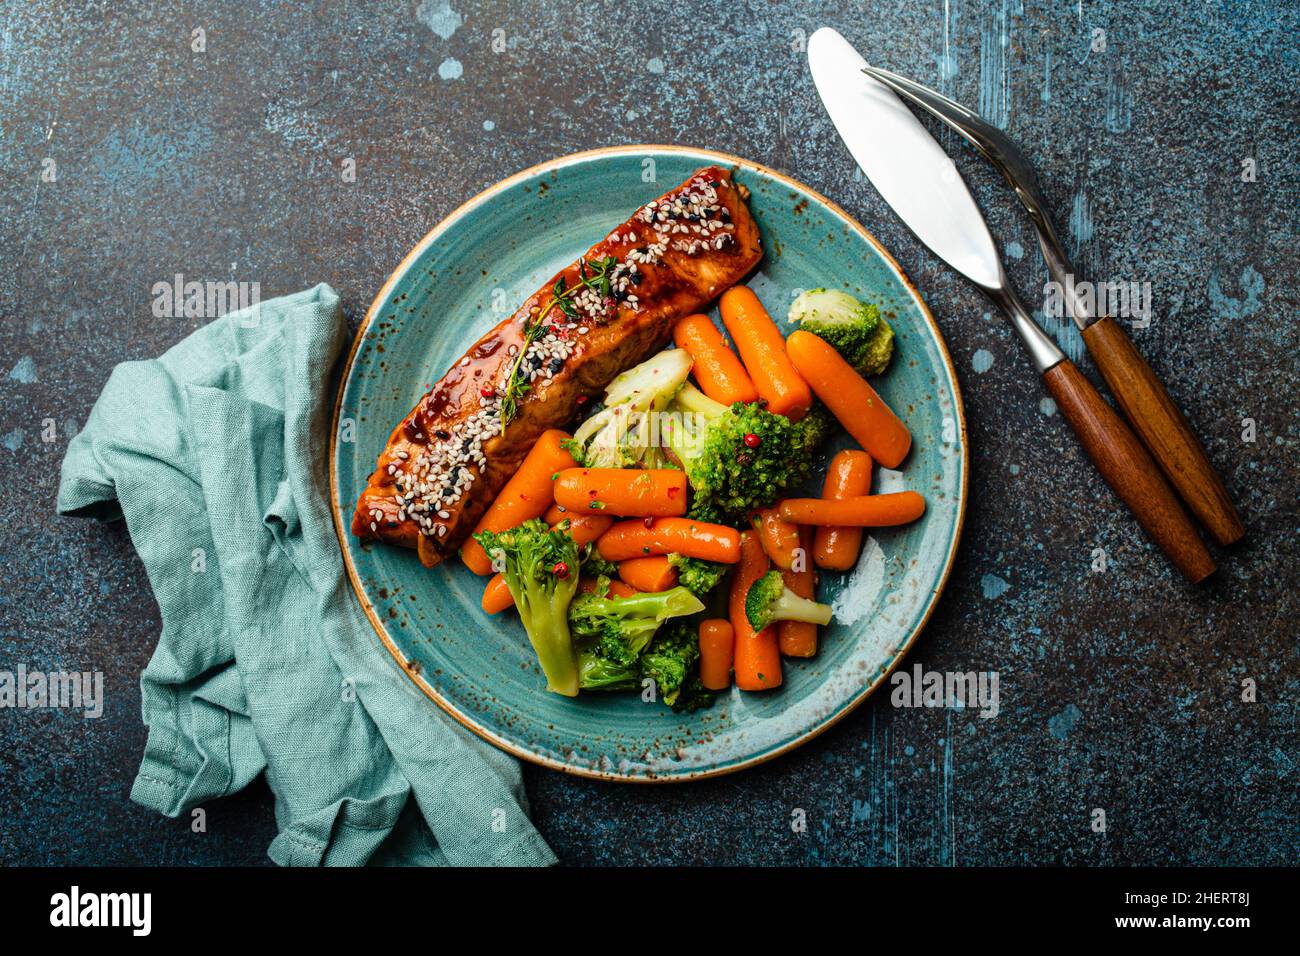 Grilled salmon fillet steak in teriyaki sauce with roasted vegetables carrot and broccoli Stock Photo